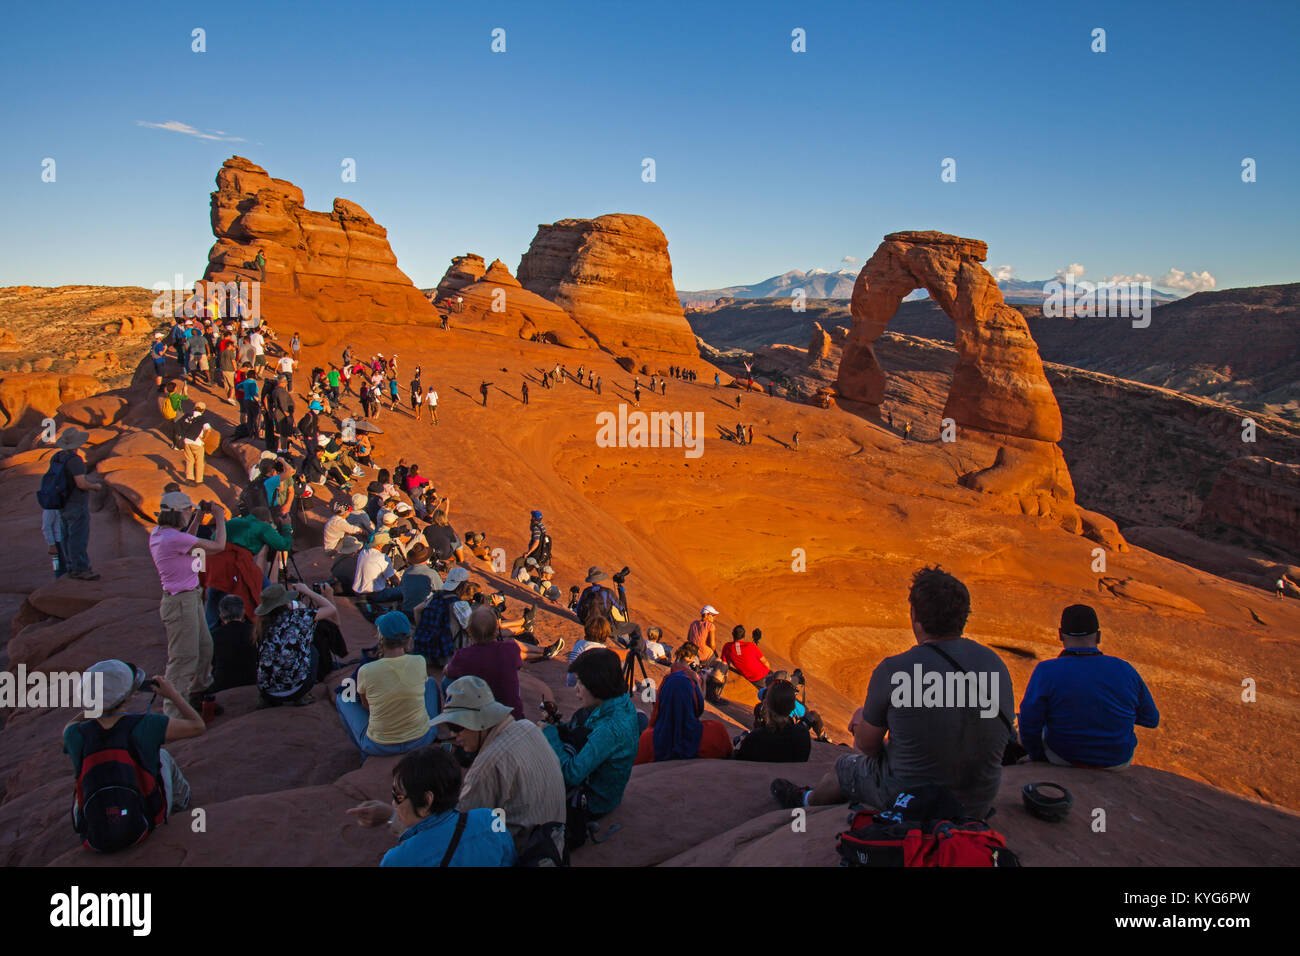 The Sunset Crowd at Delicate Arch Stock Photo